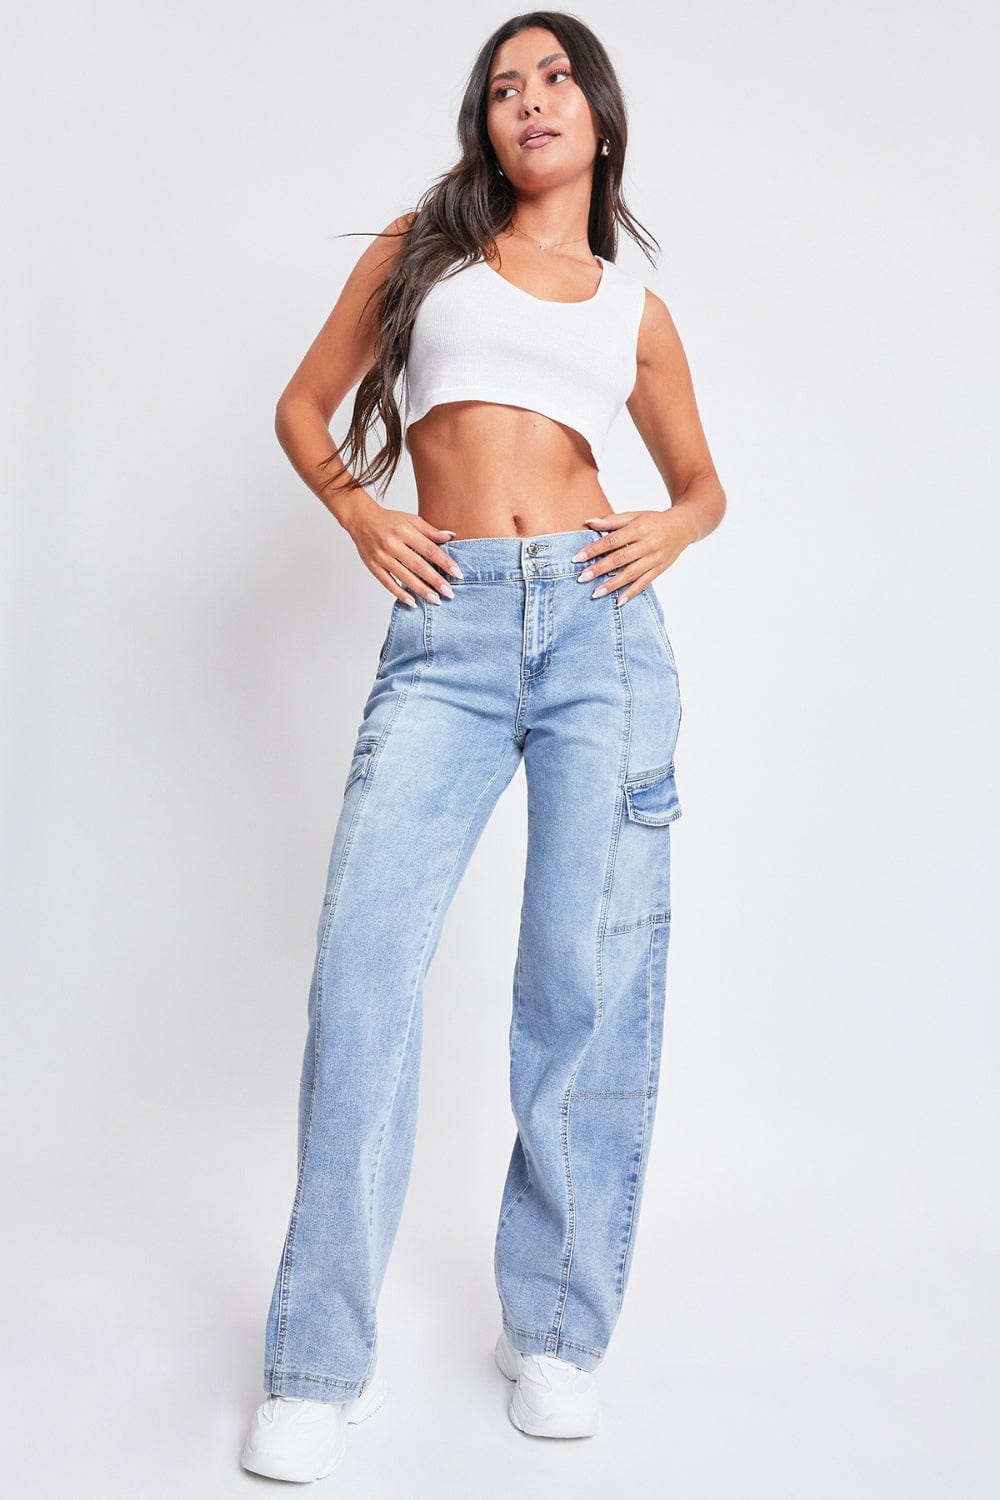 The802Gypsy Bottoms/Jeans Light Wash / S ❤️GYPSY-YMI Jeanswear-High-Rise Straight Cargo Jeans